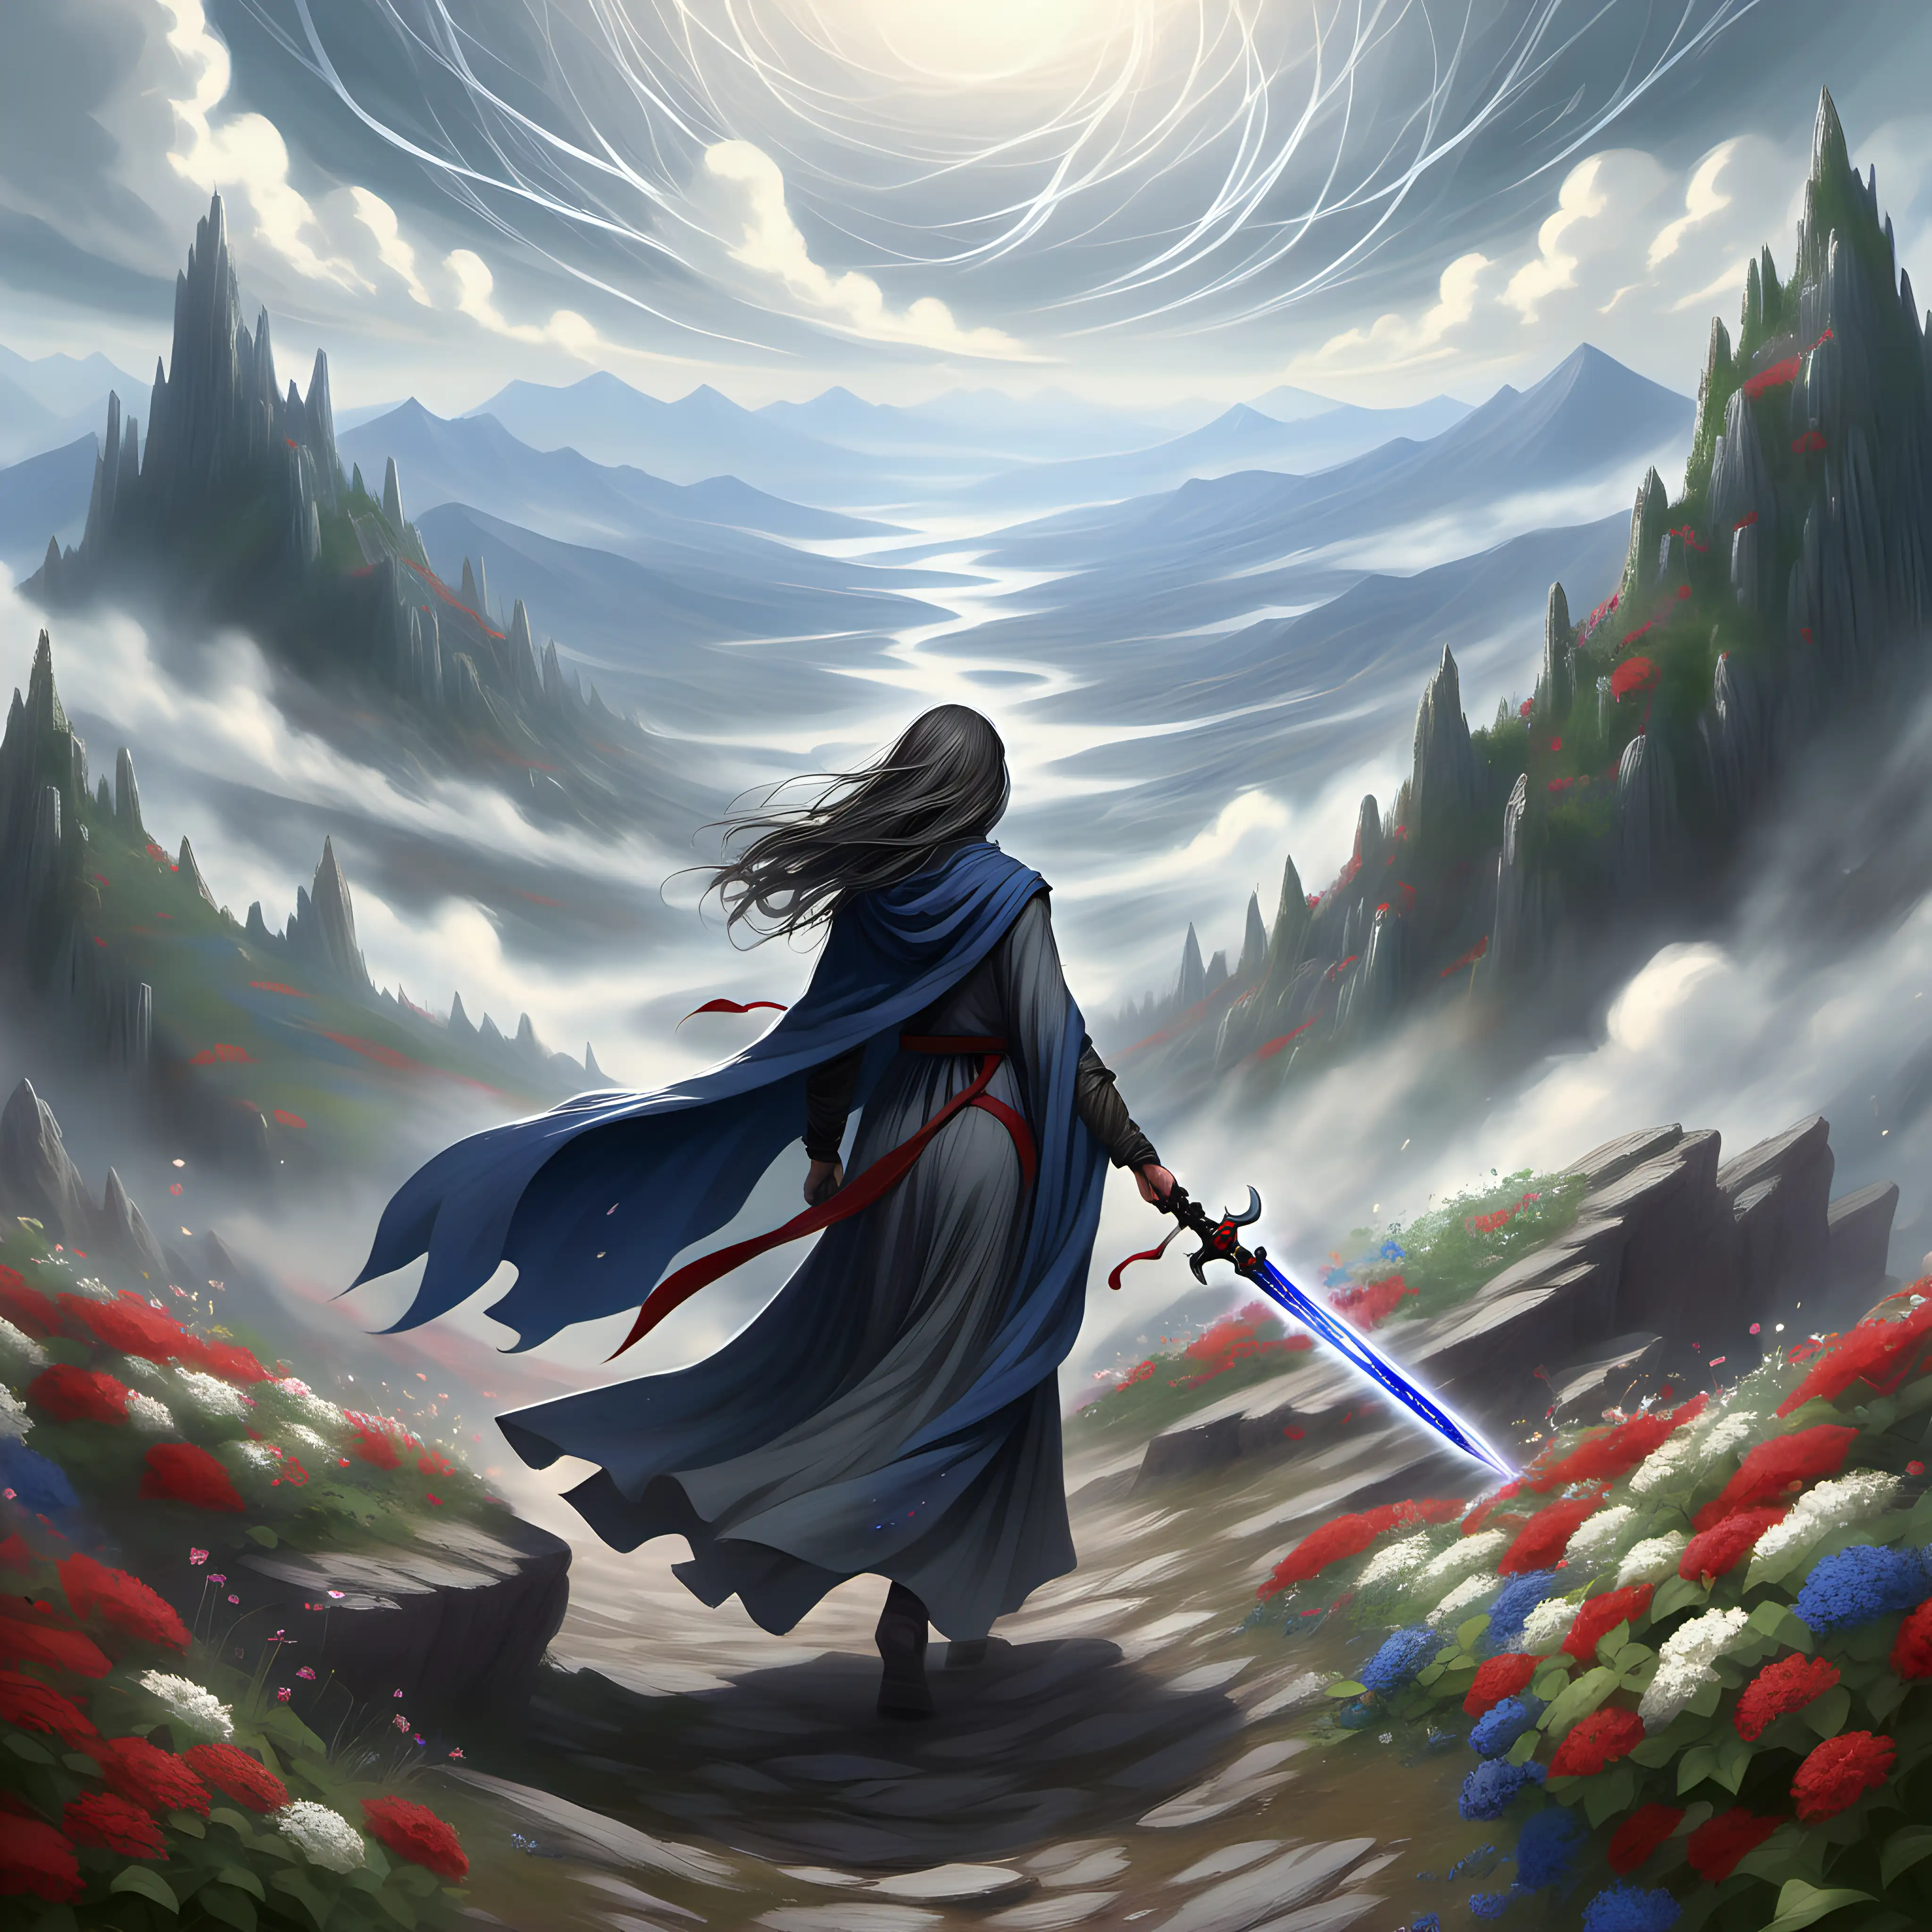 A gray-cloaked woman walking away on a mountain plateau.  She wields a lapis sword.  She is surrounded by a whirlwind of white, red, and green flowers and growing vines